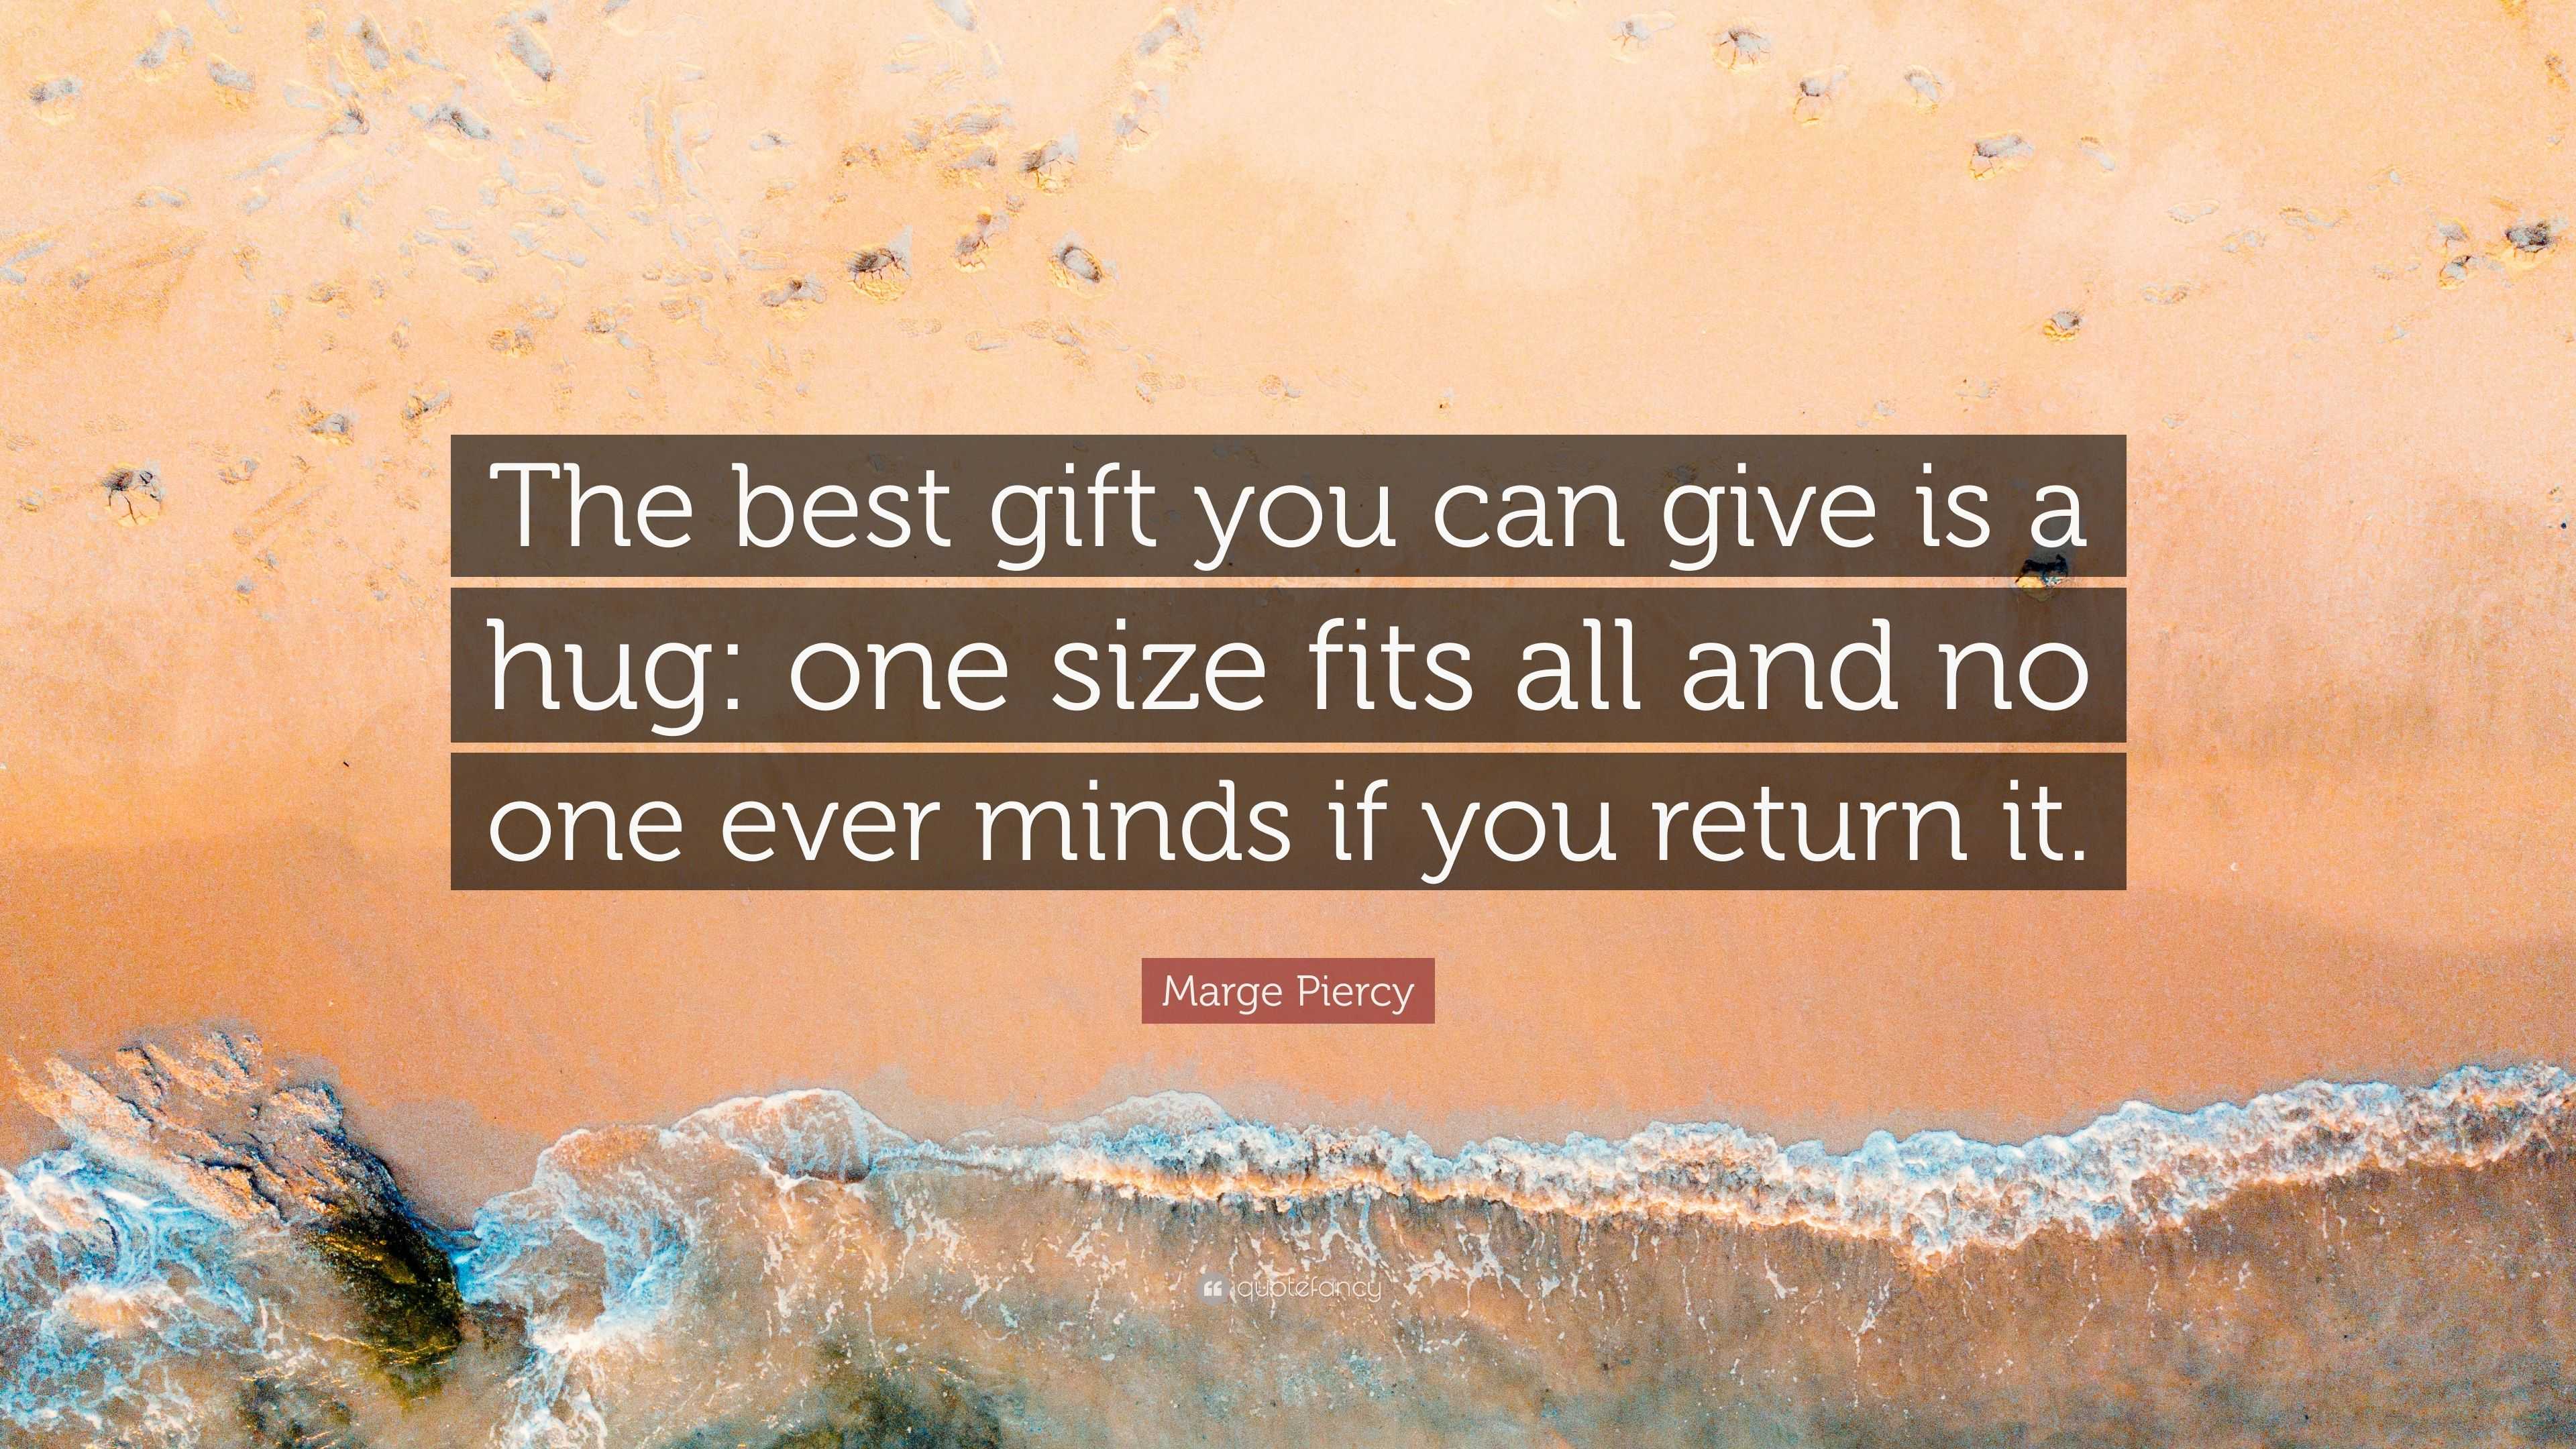 10 Quick Tips To Choose Best Return Gift- BoonToon | Return gift, Gifts,  Practical wedding favors